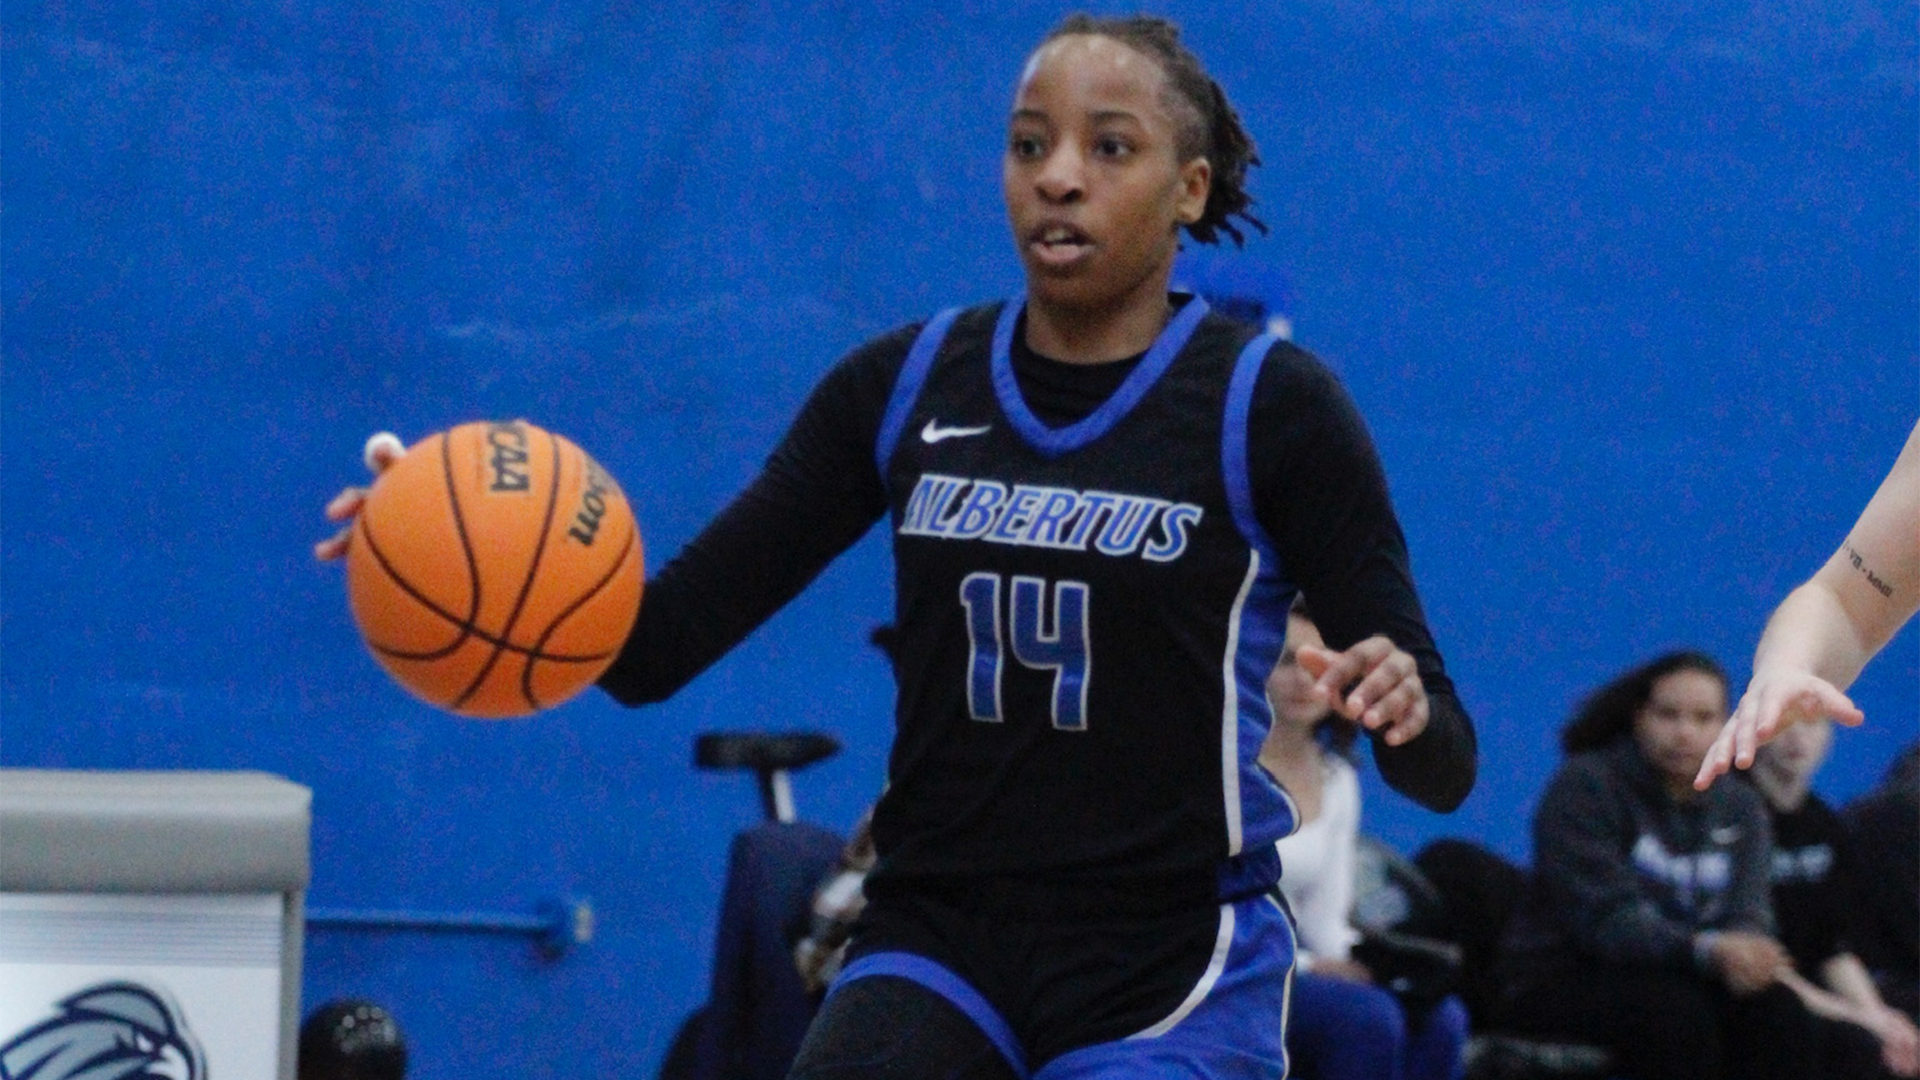 Women's Basketball Routs NEC to Close Out Regular Season